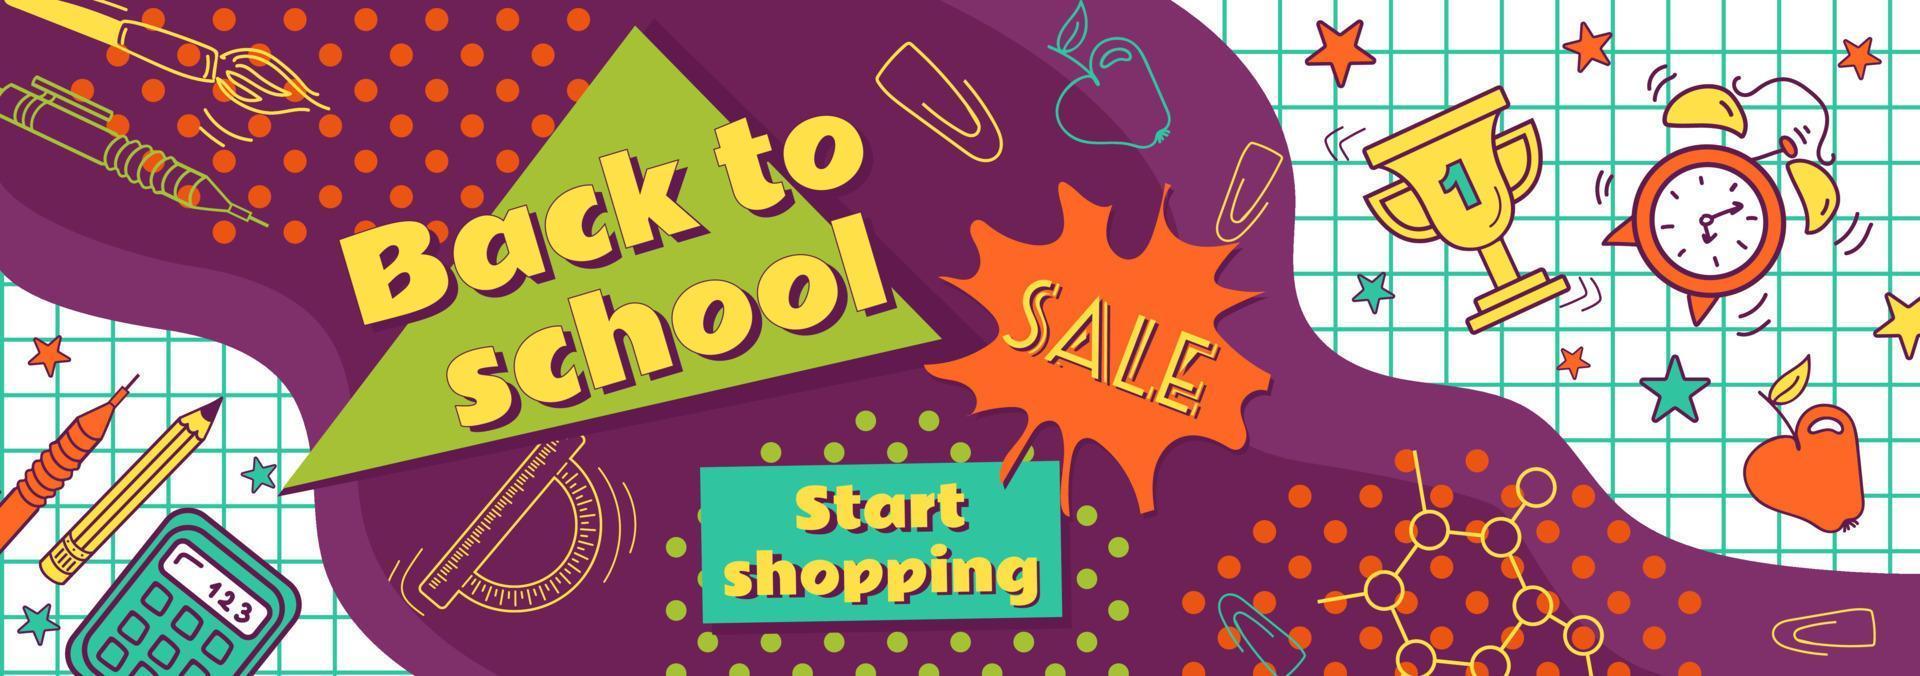 Back to school. Bright horizontal sale banner, cartoon comic style. Learning symbols, vintage colors, 90s. Alarm clock, apple, calculator, pencils. For advertising banner, website, sale flyer vector